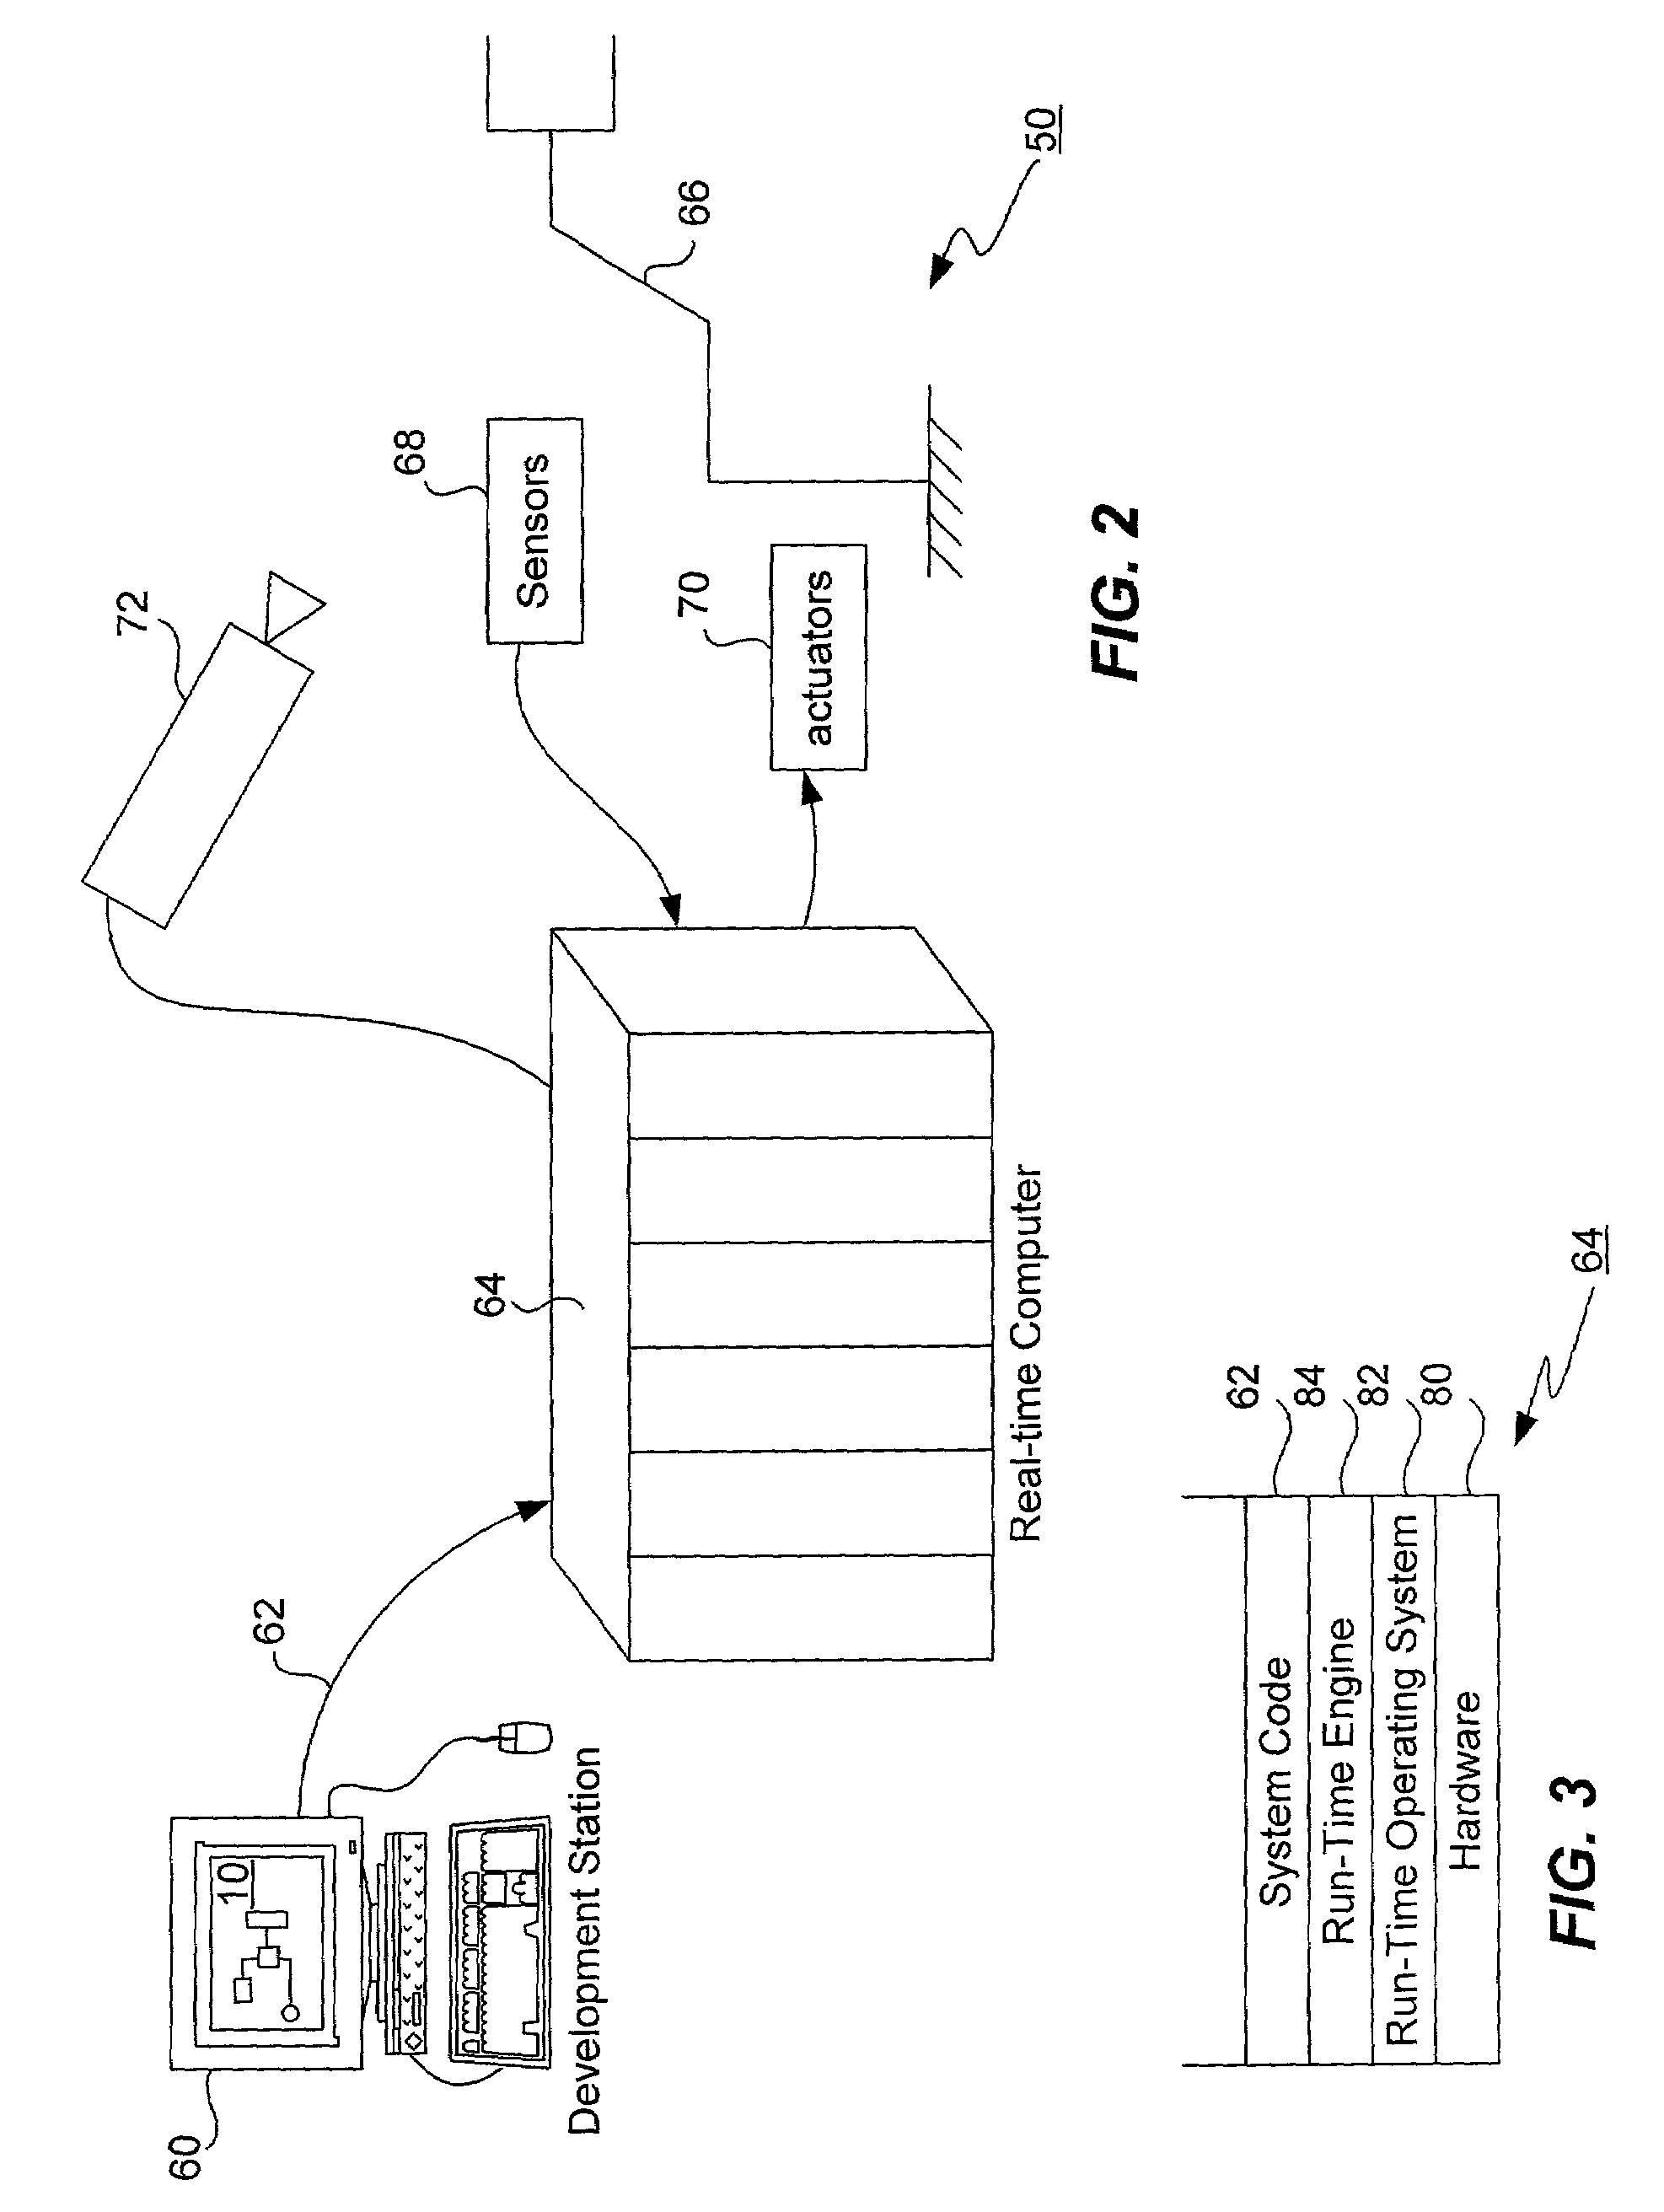 Real-time control system development tool with input pins providing values used by component during execution